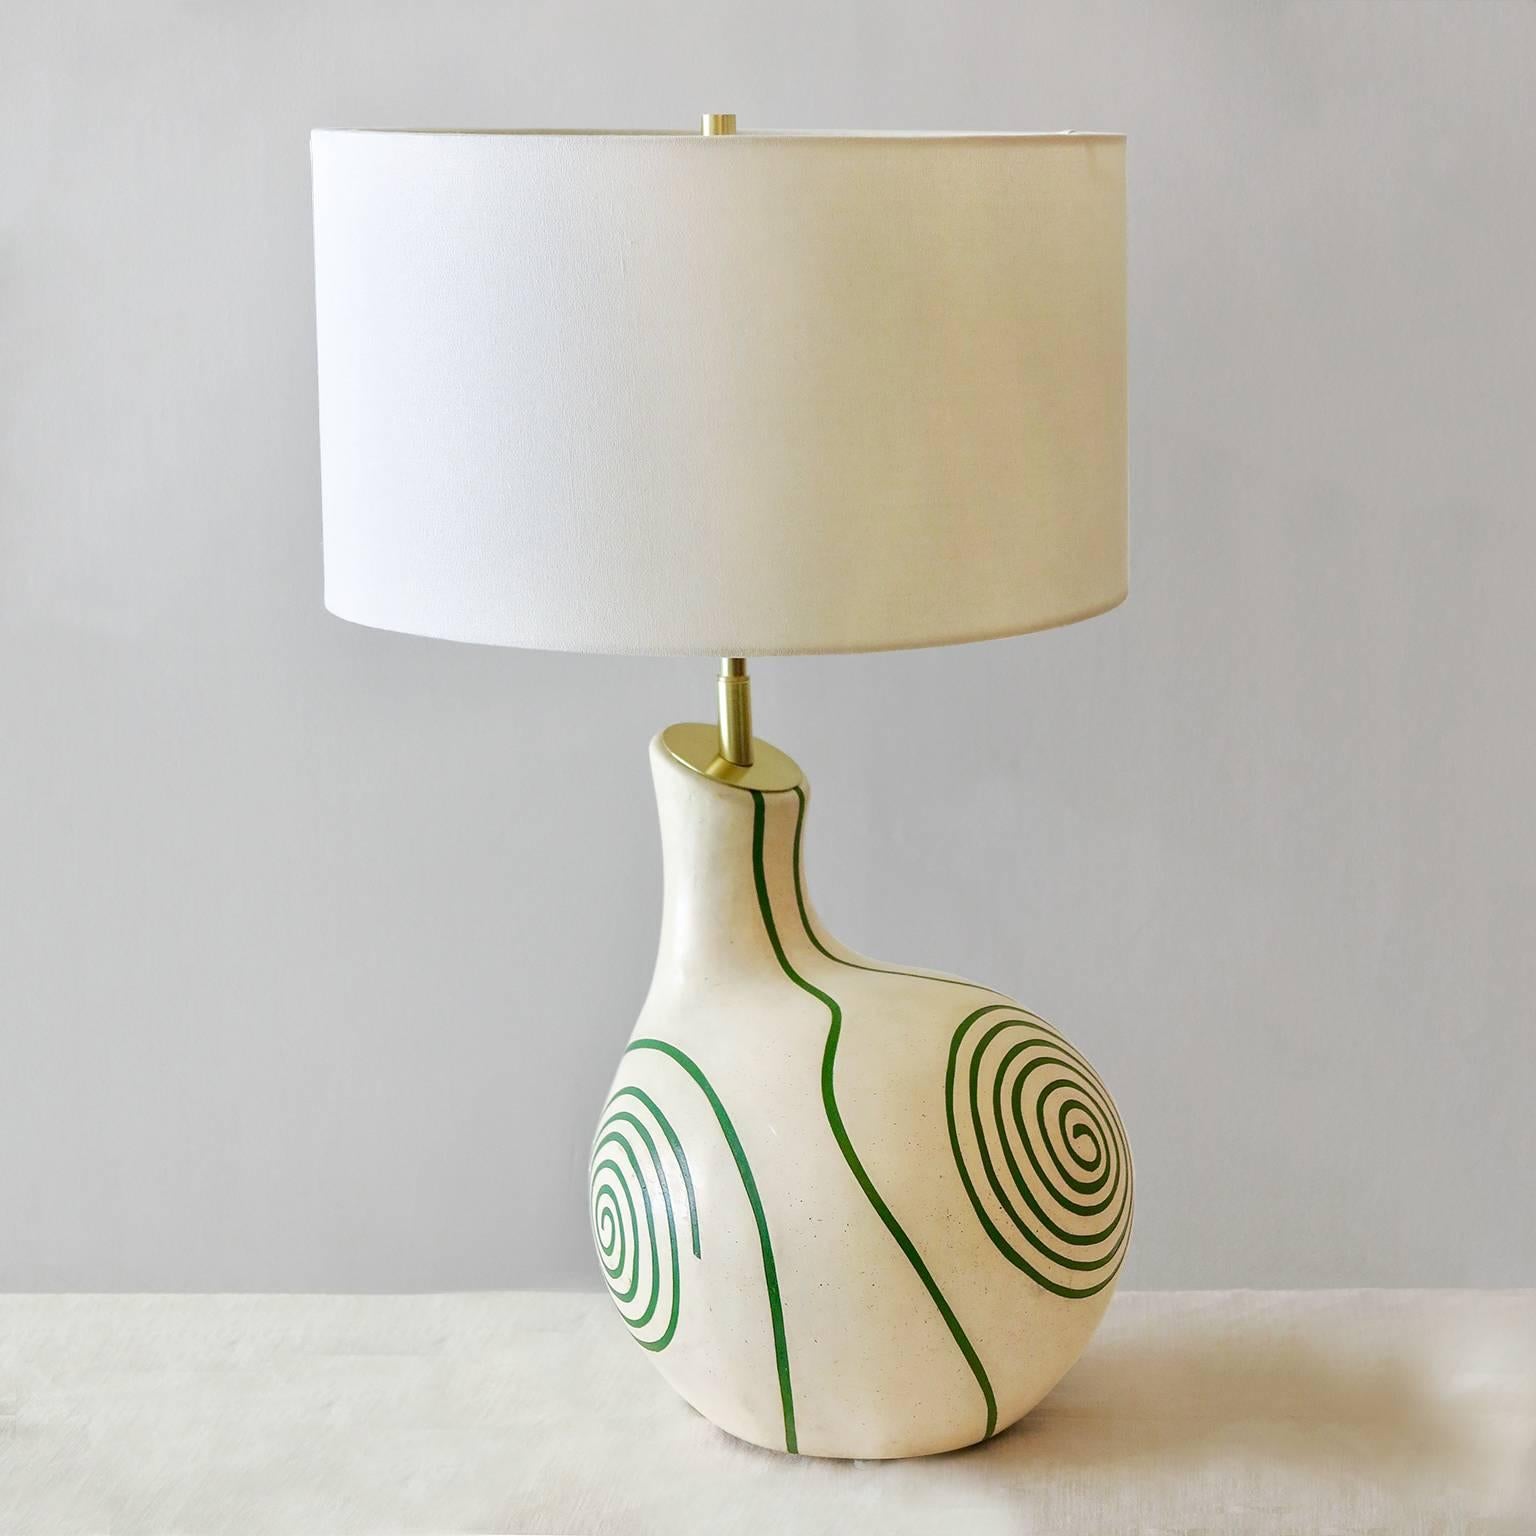 Midcentury French ceramic table lamp with hand-painted and carved colored swirl design on off-white background, France, circa 1950. Newly electrified with 2 sockets.